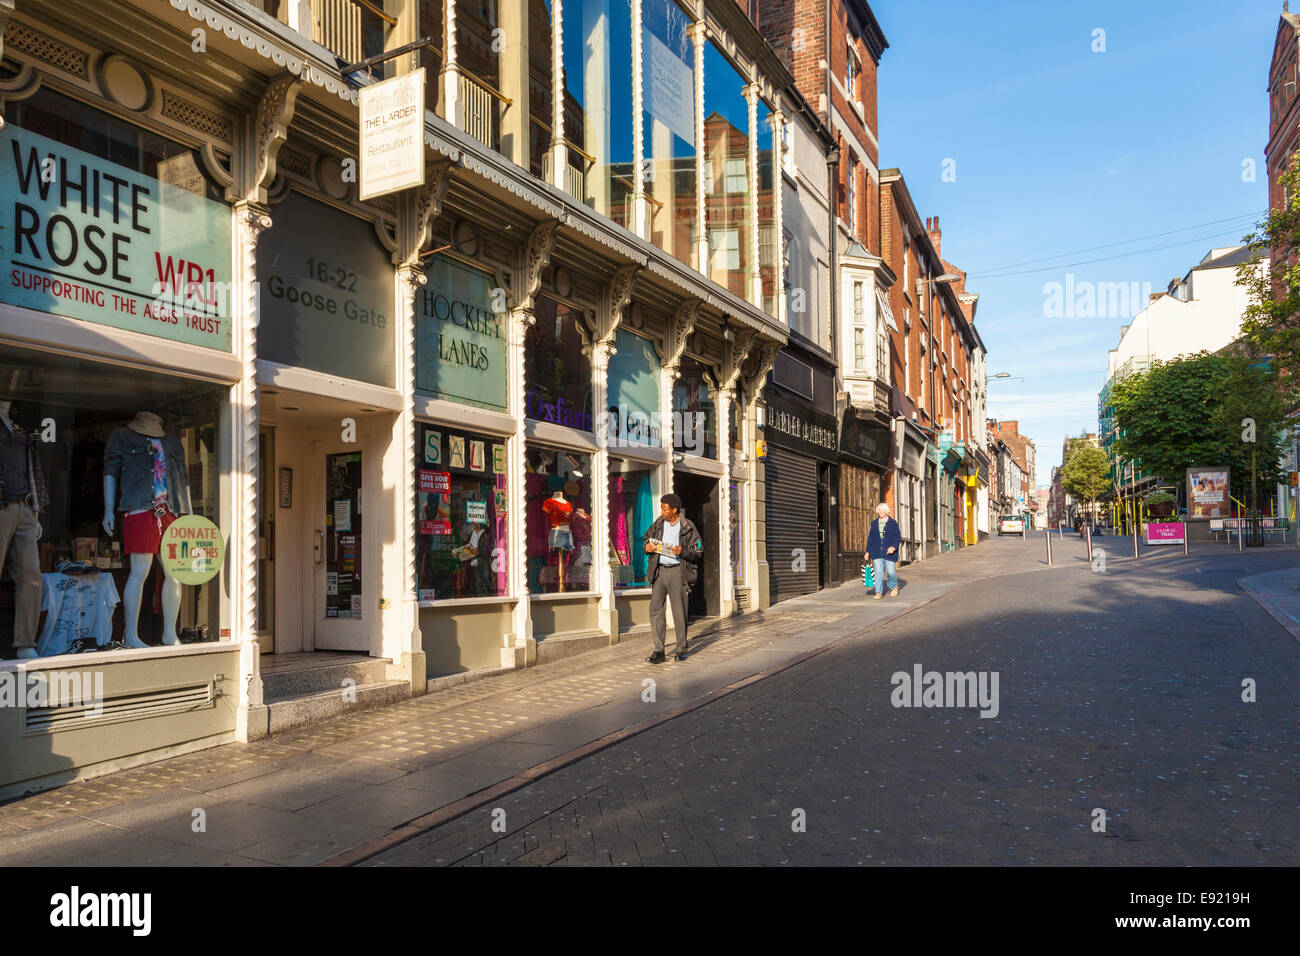 Shops, early morning in Summer, on Goose Gate in Hockley, Nottingham, England, UK Stock Photo